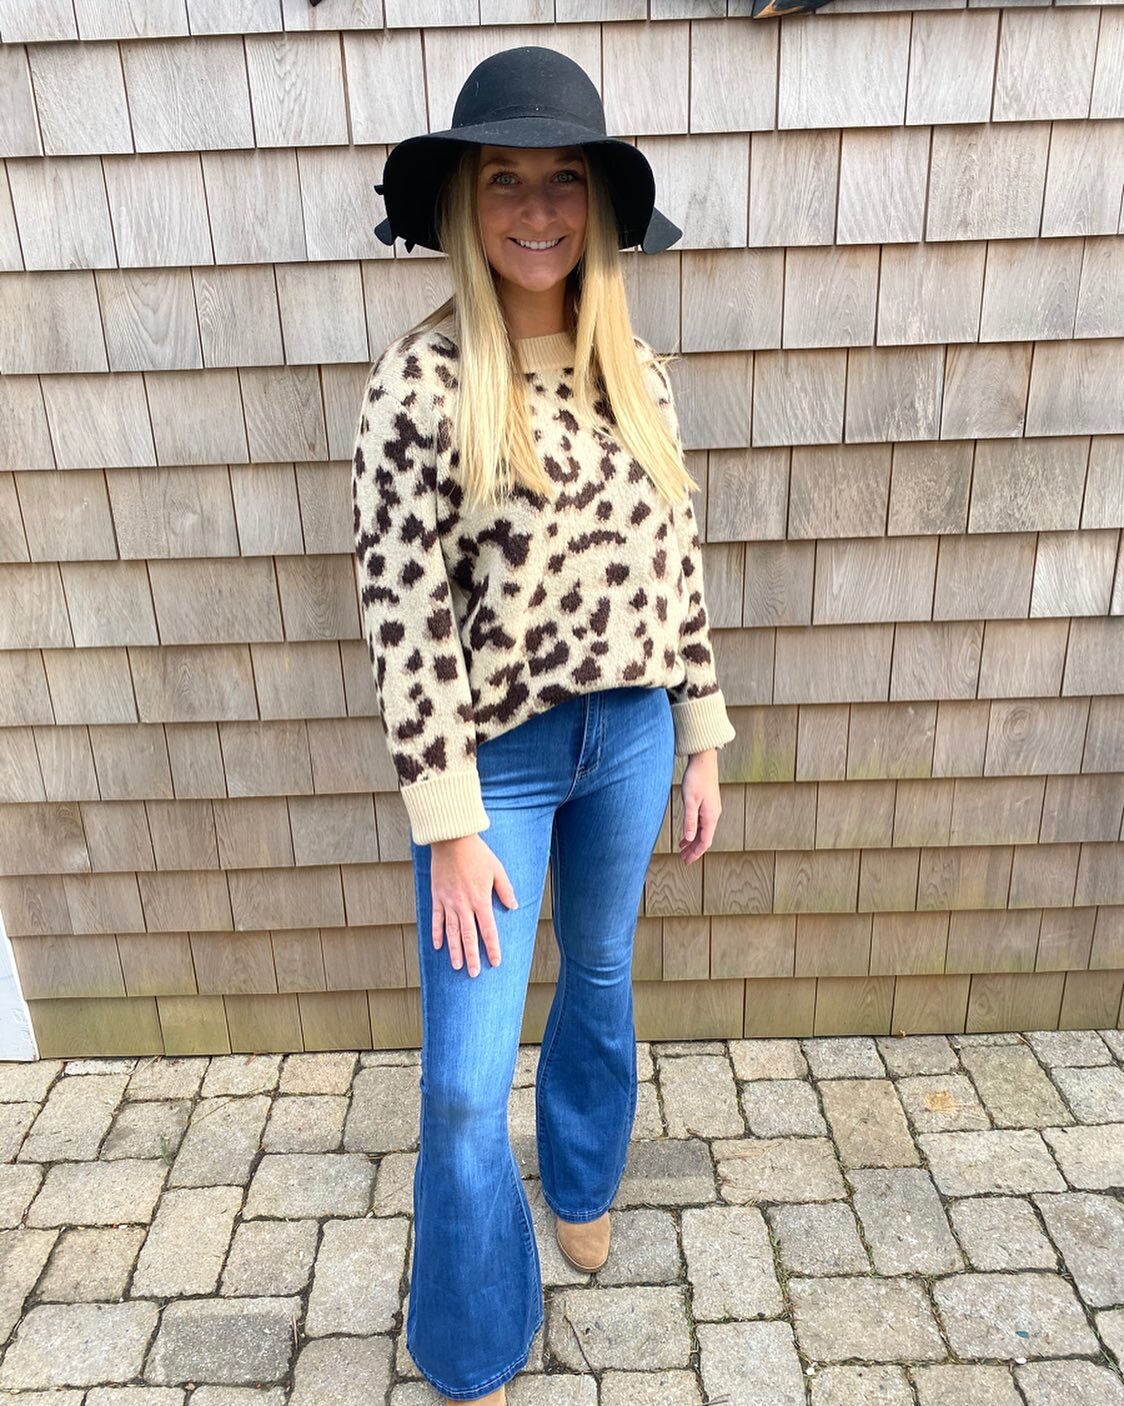 Our new ✨Cheetahlicious Sweater✨
Available in S,M,L but limited quantity so order yours now through the link in our bio! 

#trendy #cheetah #cozy #boutiqueshopping